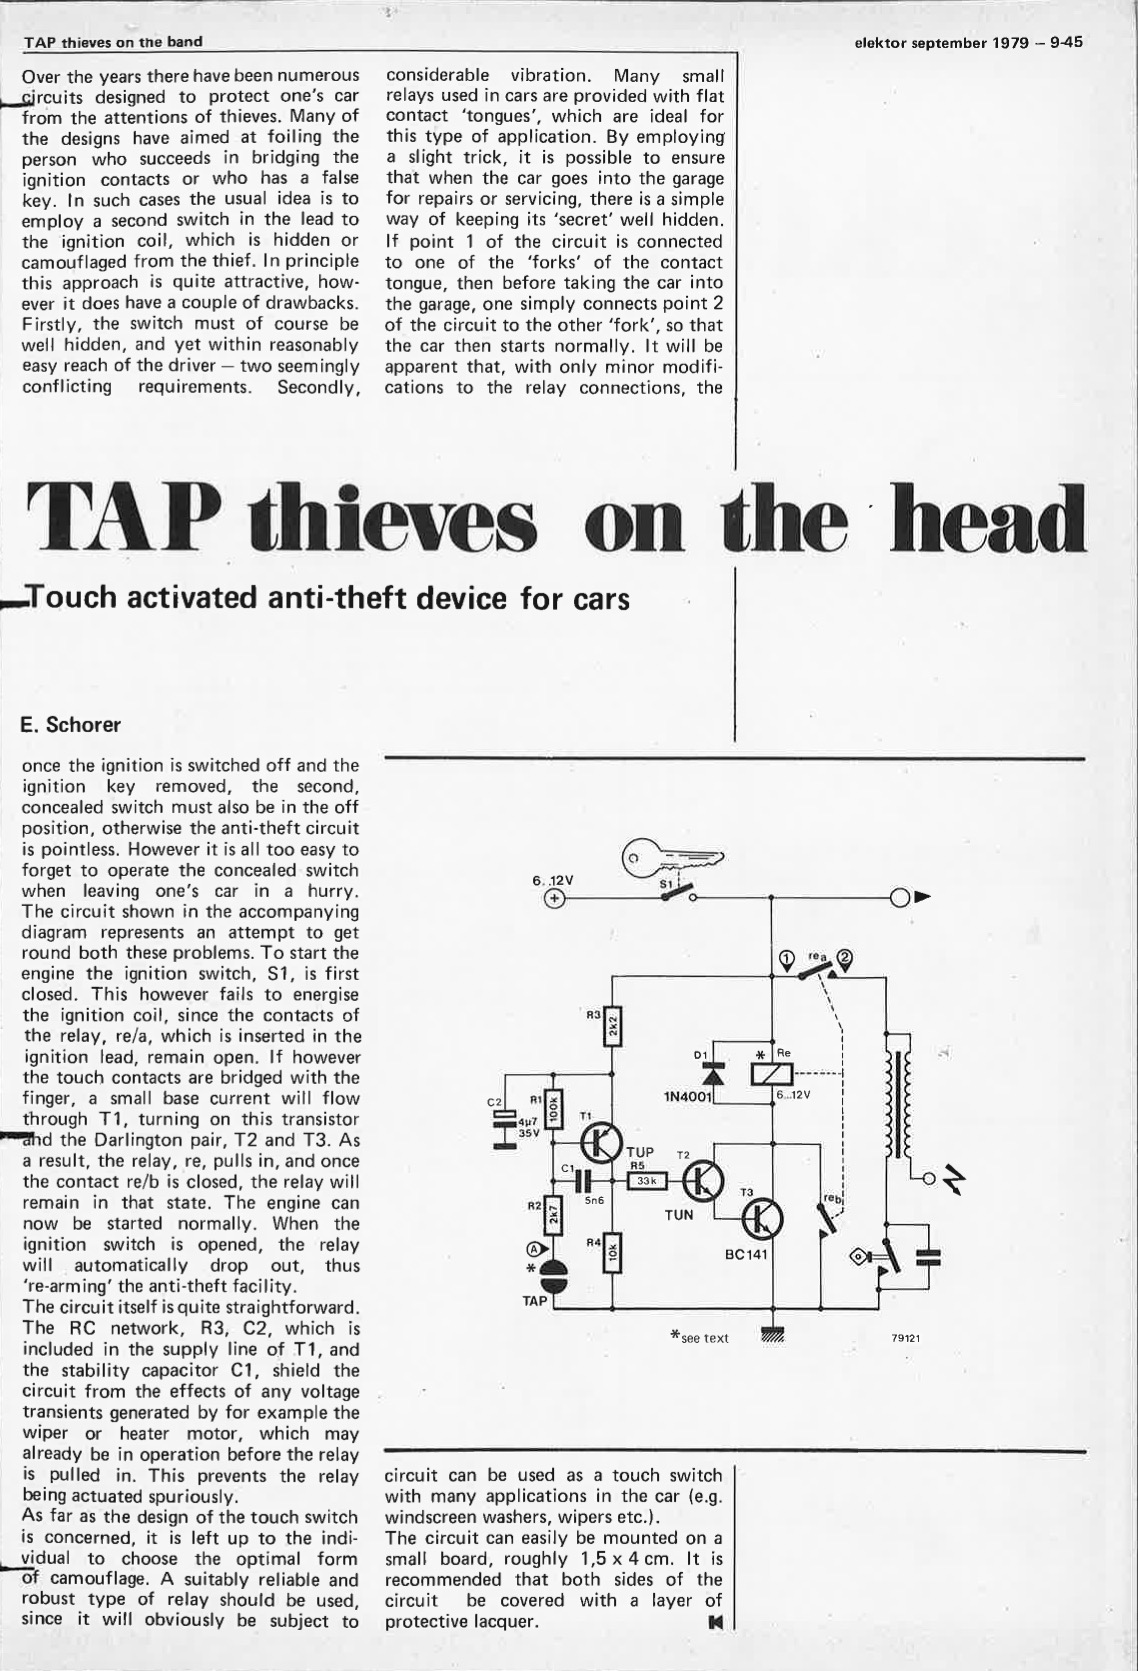 TAP thieves on the head